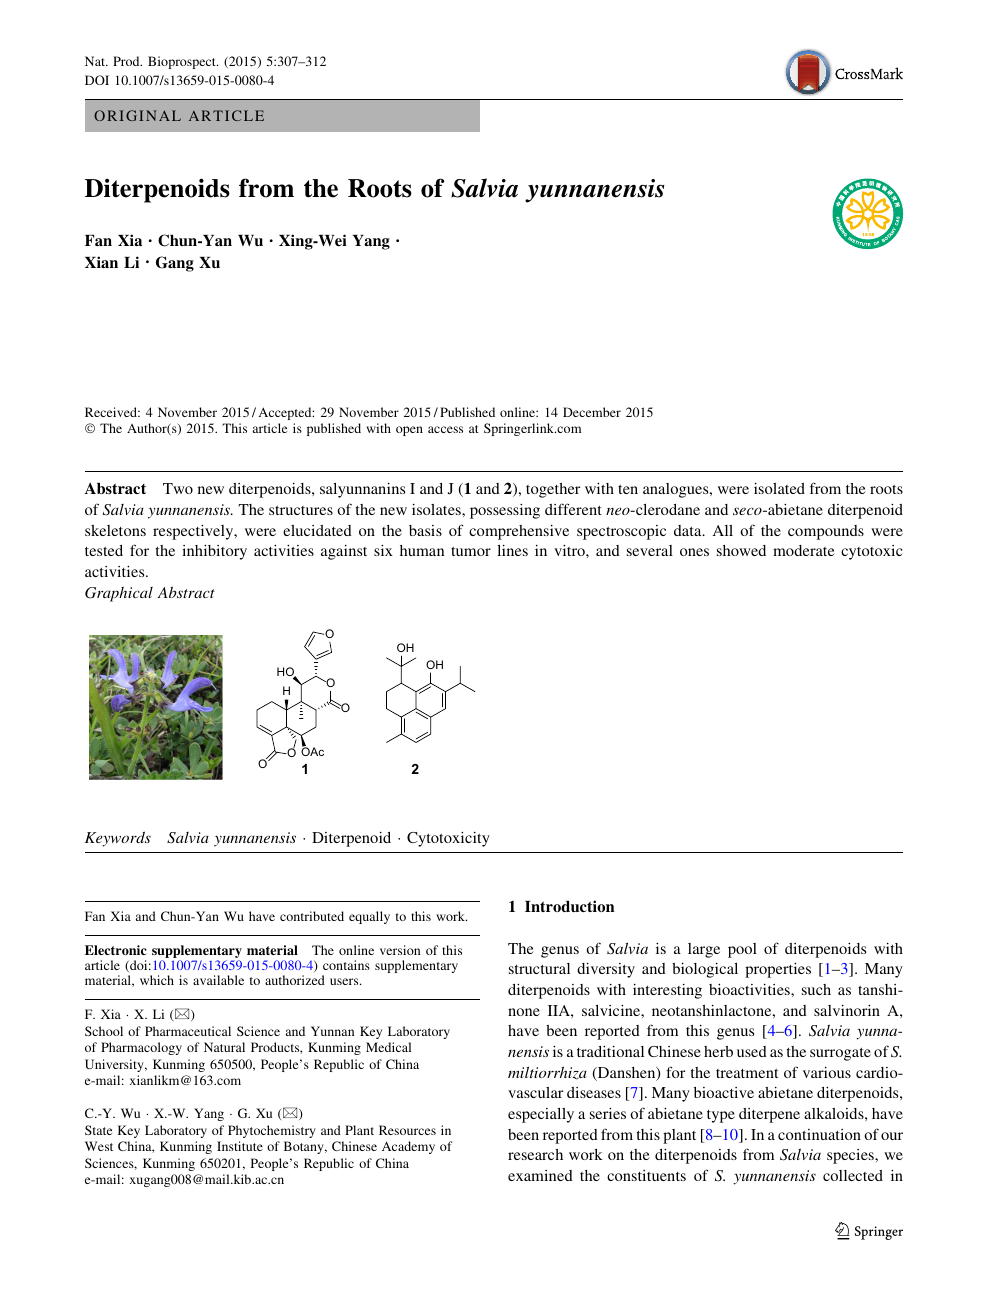 Diterpenoids From The Roots Of Salvia Yunnanensis Topic Of Research Paper In Chemical Sciences Download Scholarly Article Pdf And Read For Free On Cyberleninka Open Science Hub